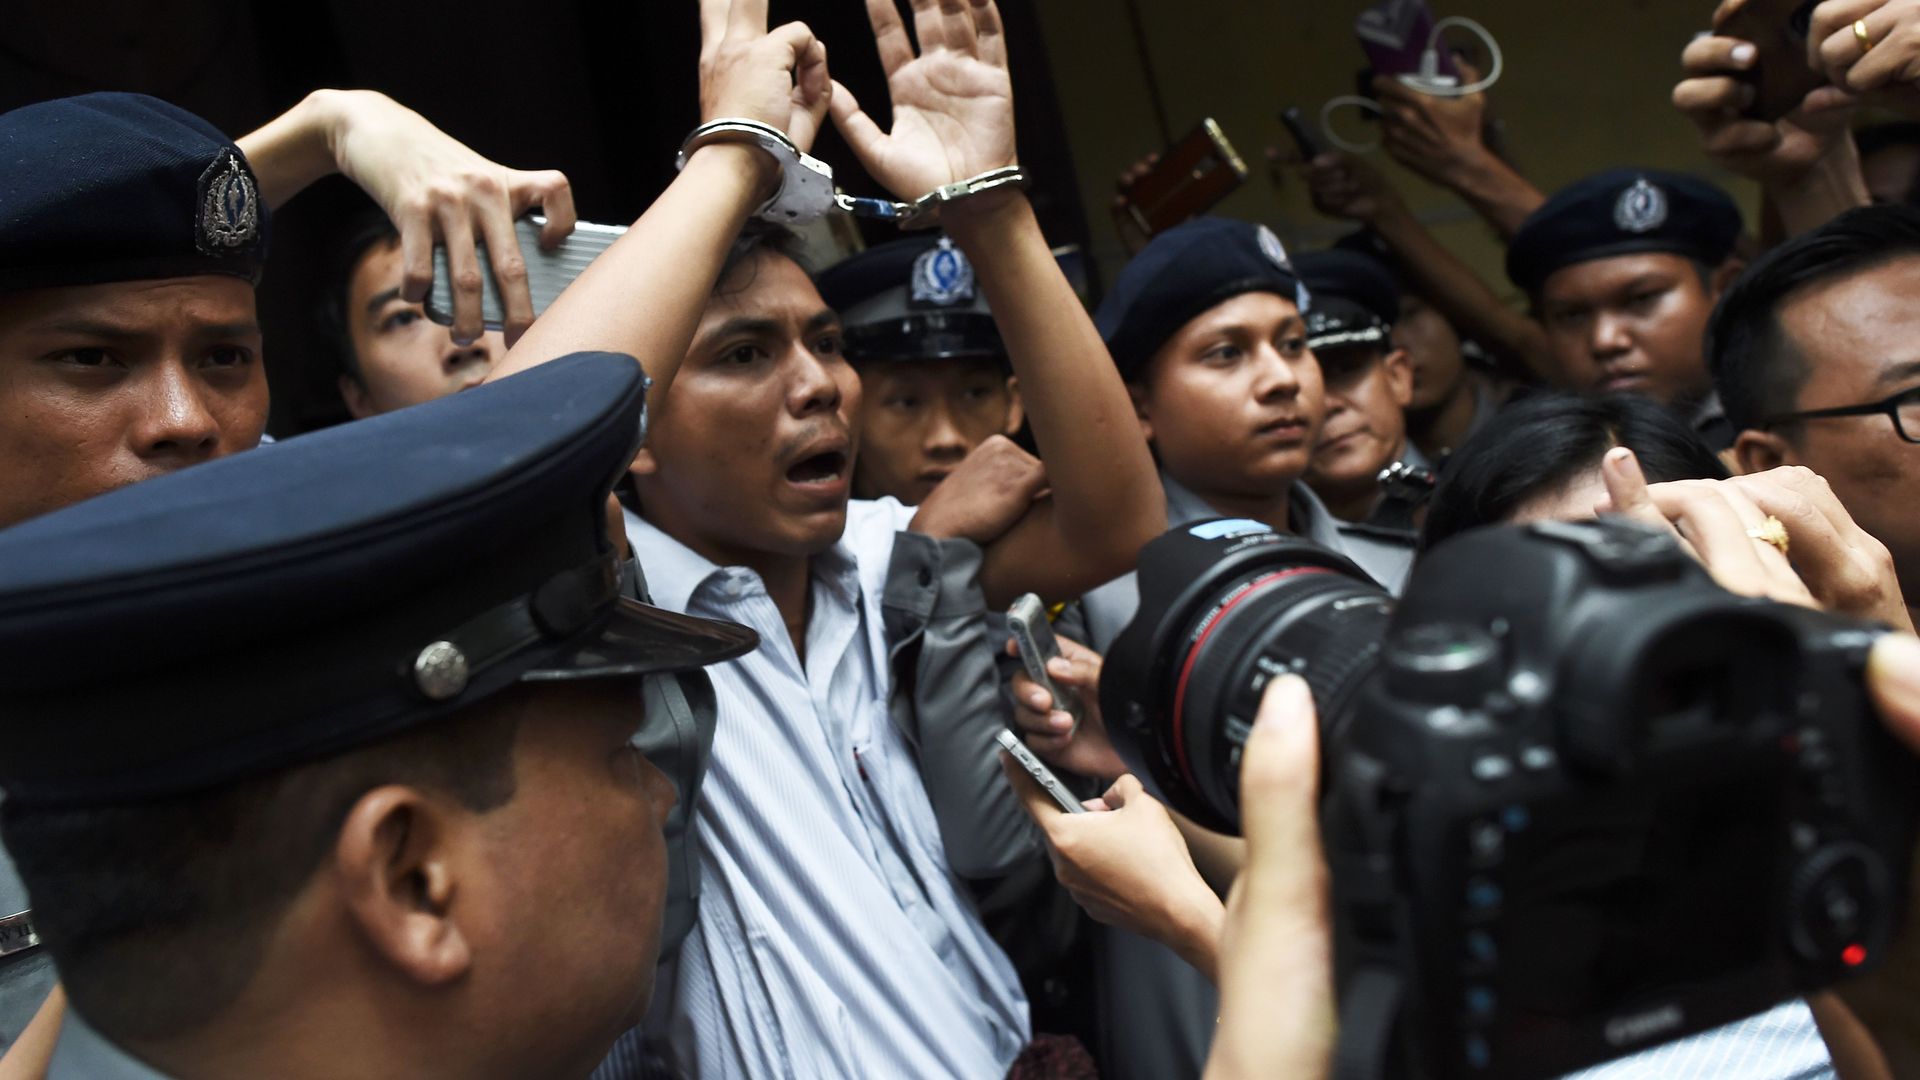 Reuters journalist Kyaw Soe Oo gets escorted by police after being sentenced to seven years in prison